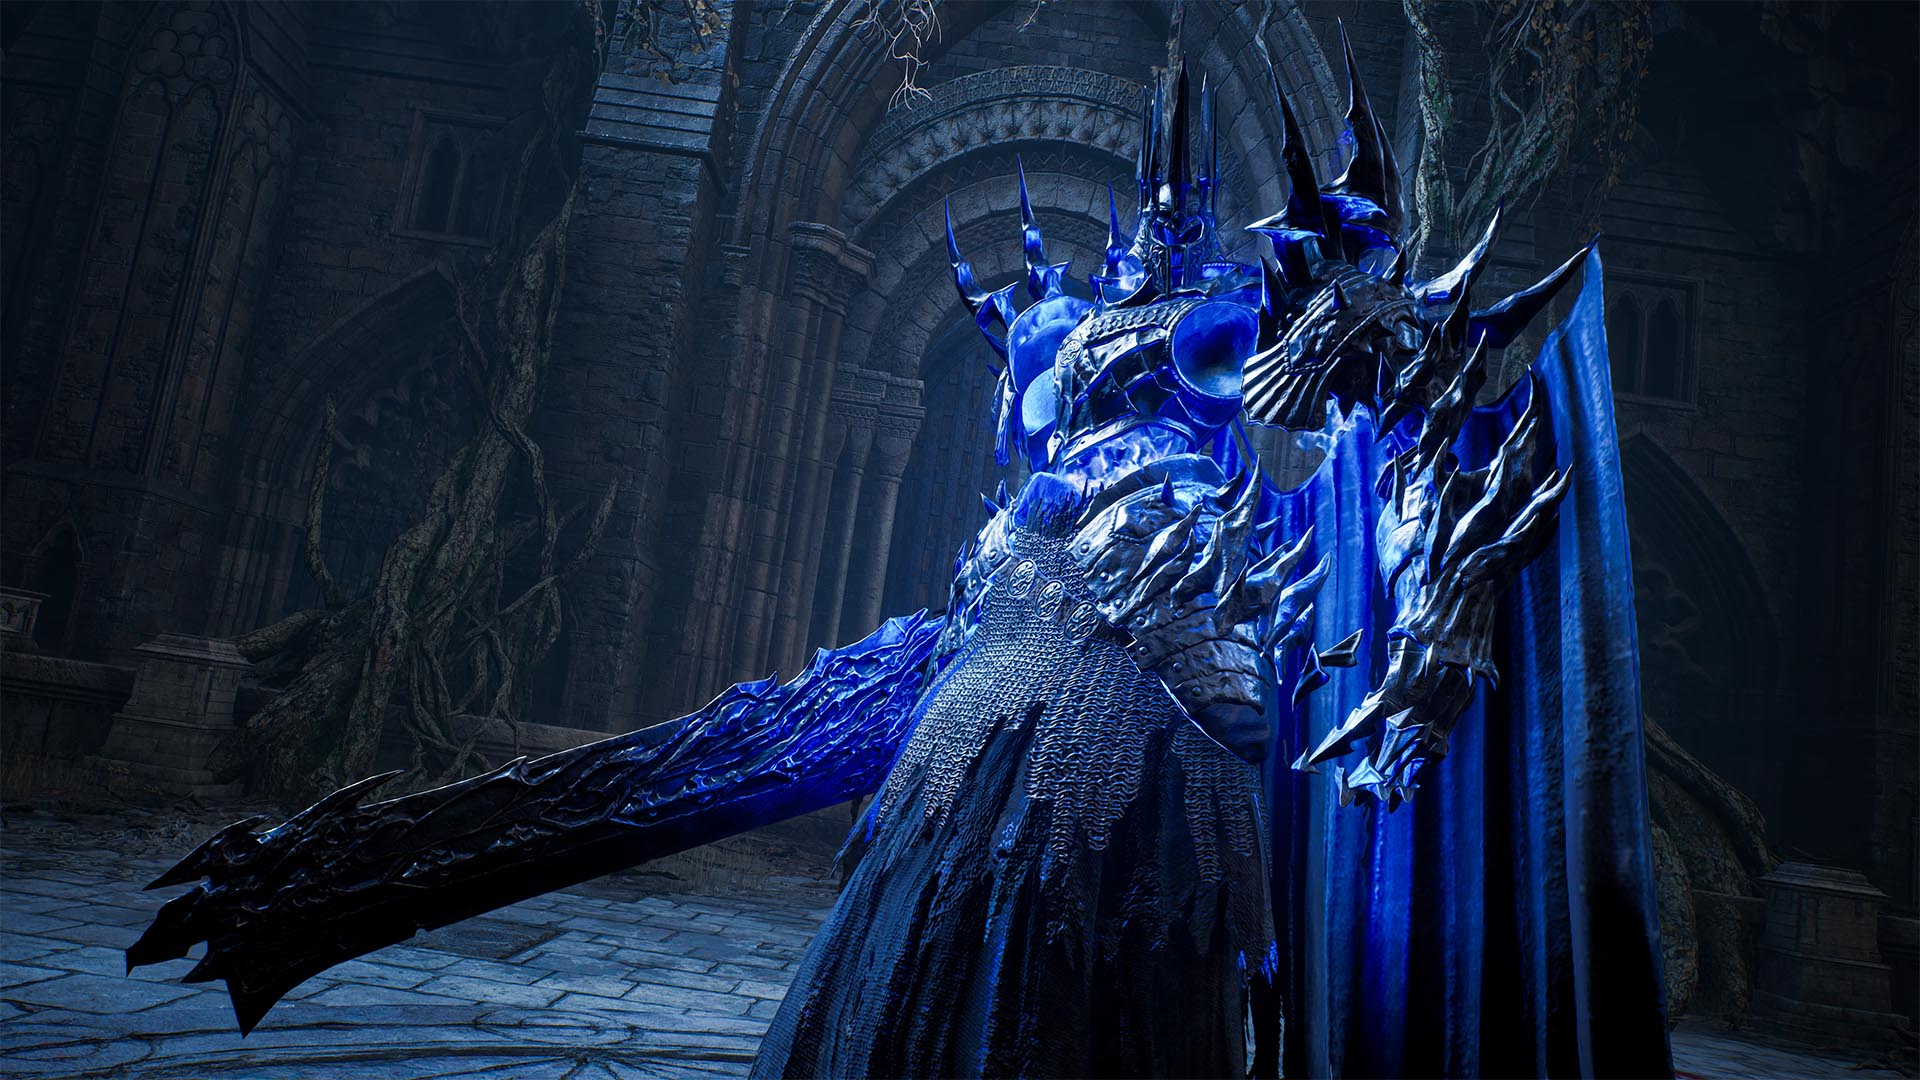 Is Throne and Liberty using Unreal Engine 4 or 5? - AlcastHQ